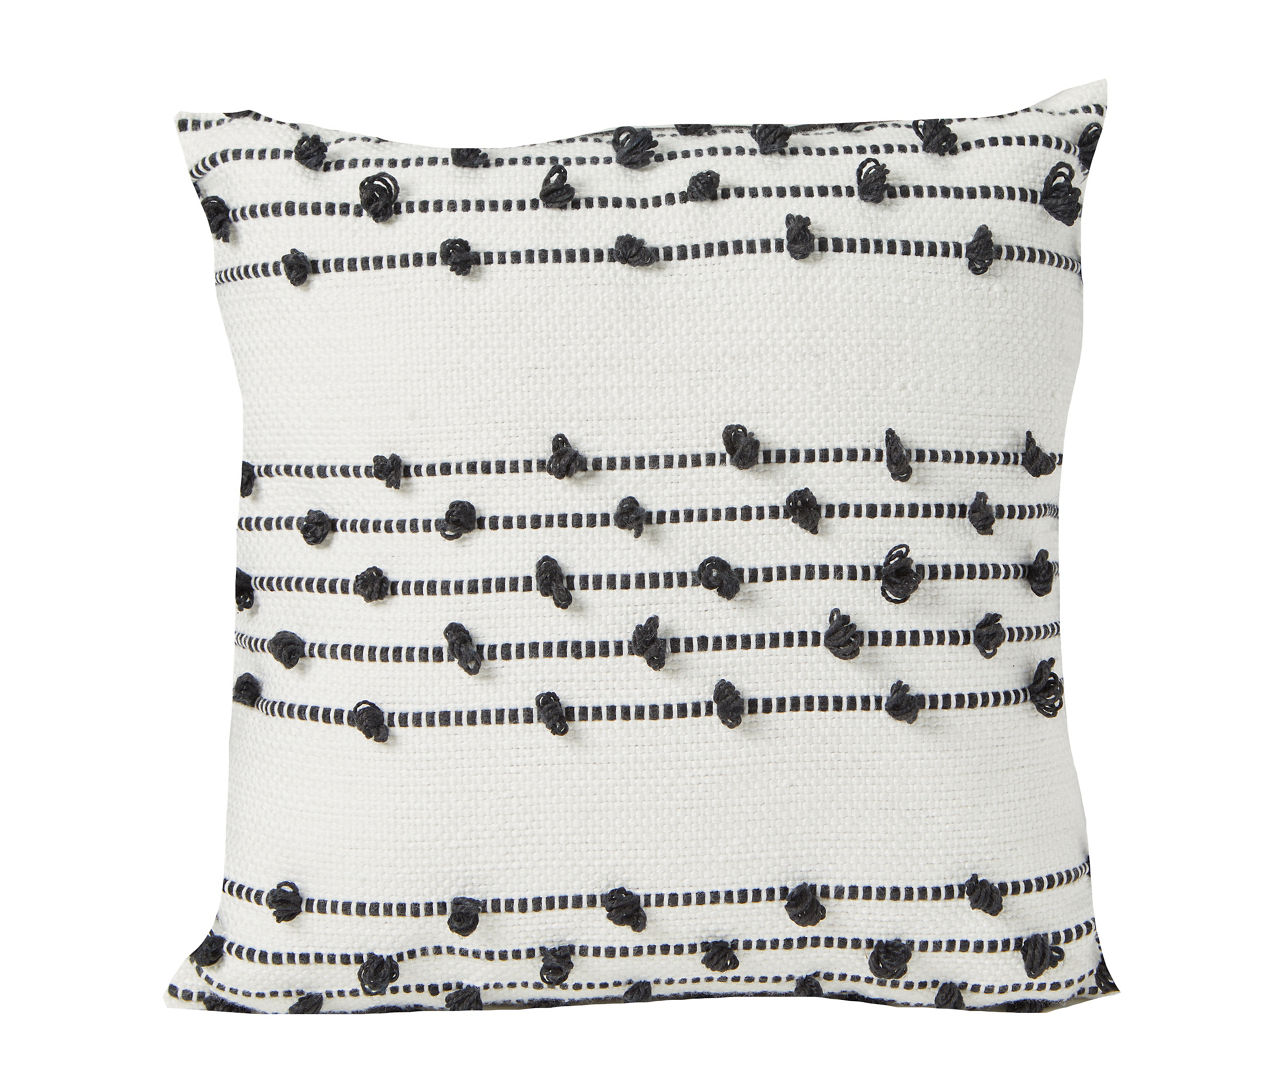 Boho Big Arrows in Black and White Throw Pillow by House of HaHa